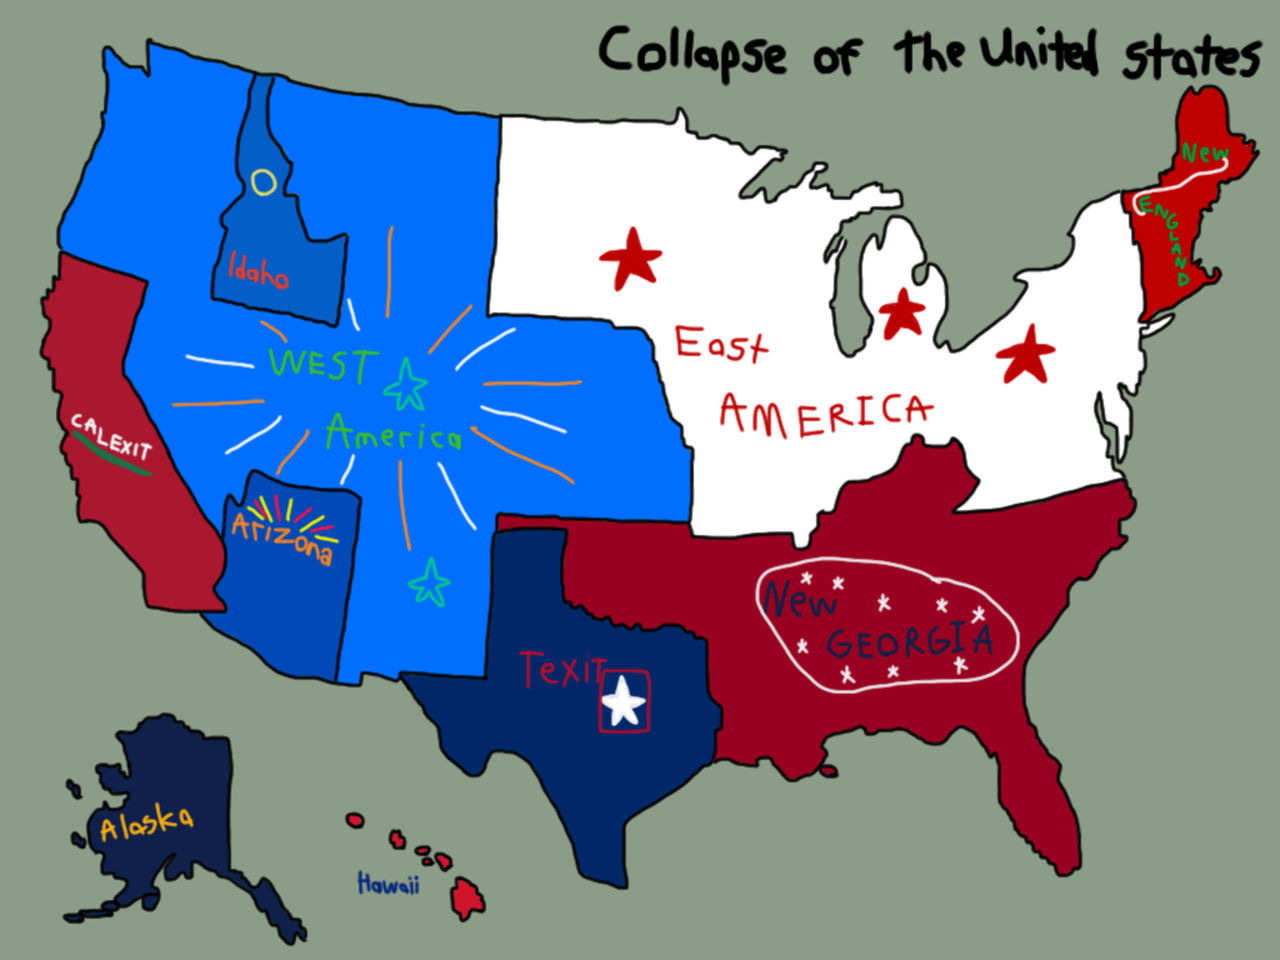 Like it or not - Collapse of the United States